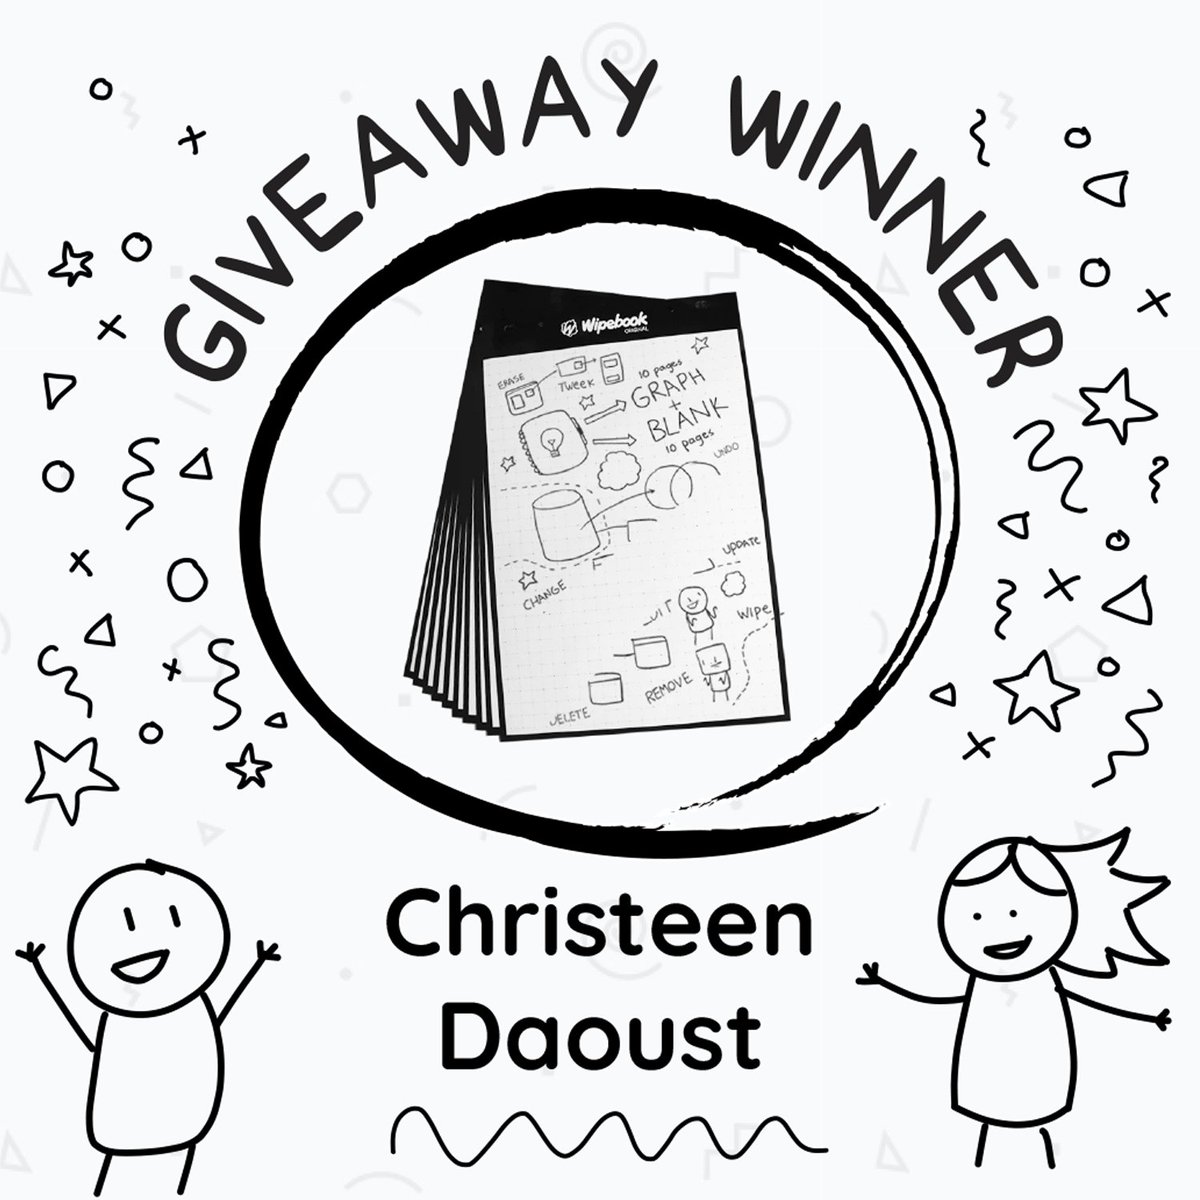 Congratulations to Christeen Daoust, our weekly Flipchart winner!🎉 Visit: wipebook.com/contest to enter the weekly giveaway. #flipchart #contest #giveaway #win